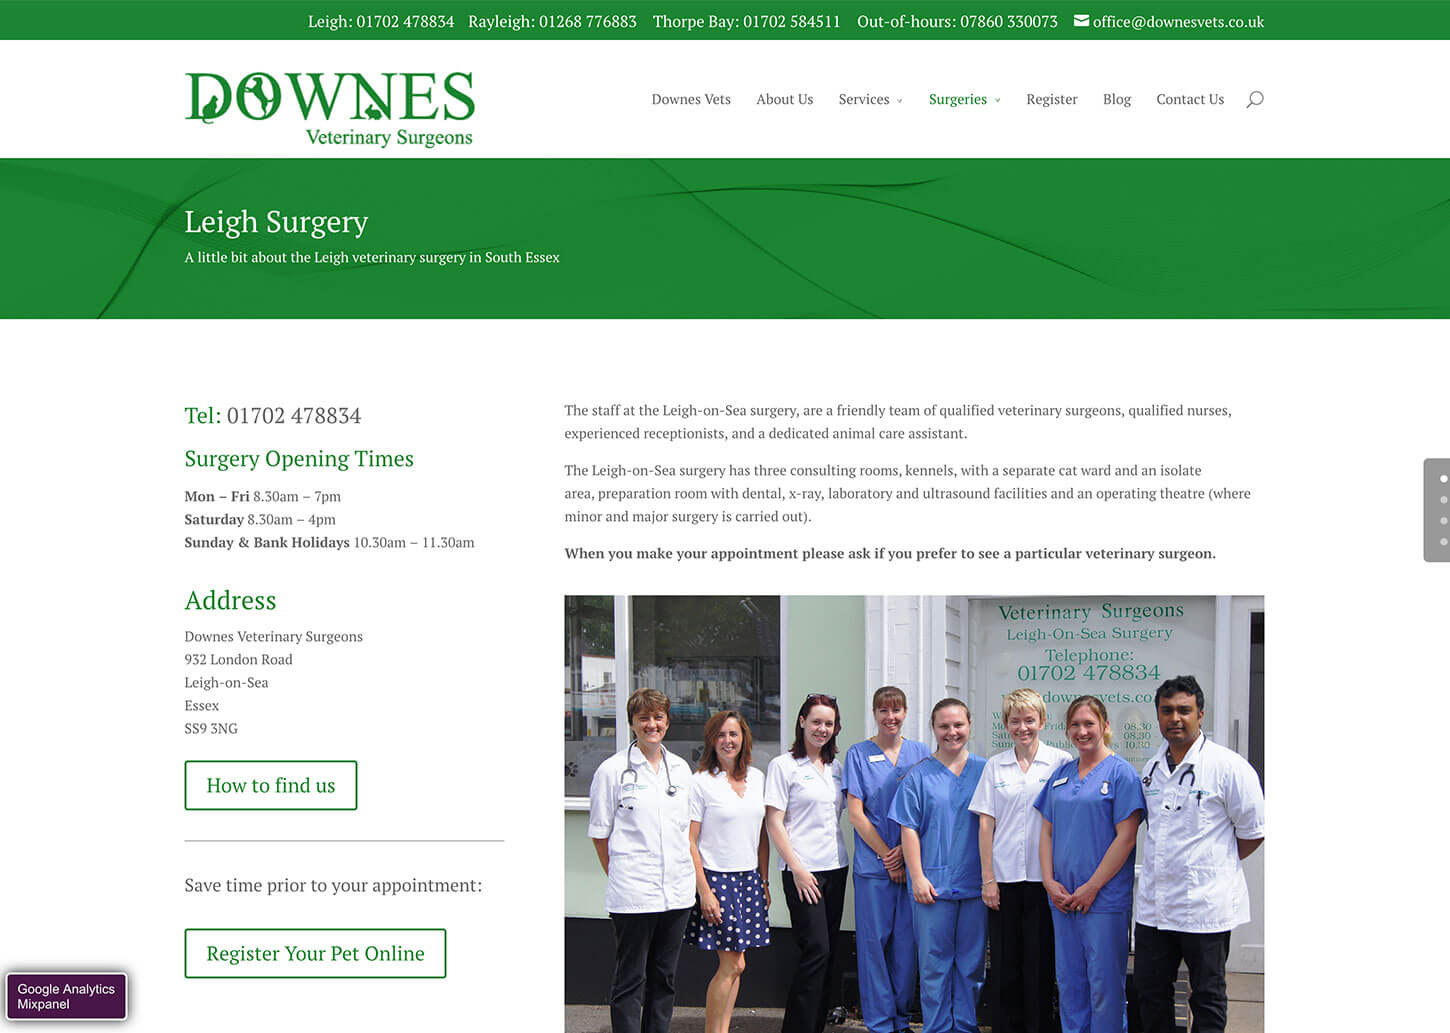 Vets website design for Downes Vets: Example Practice page